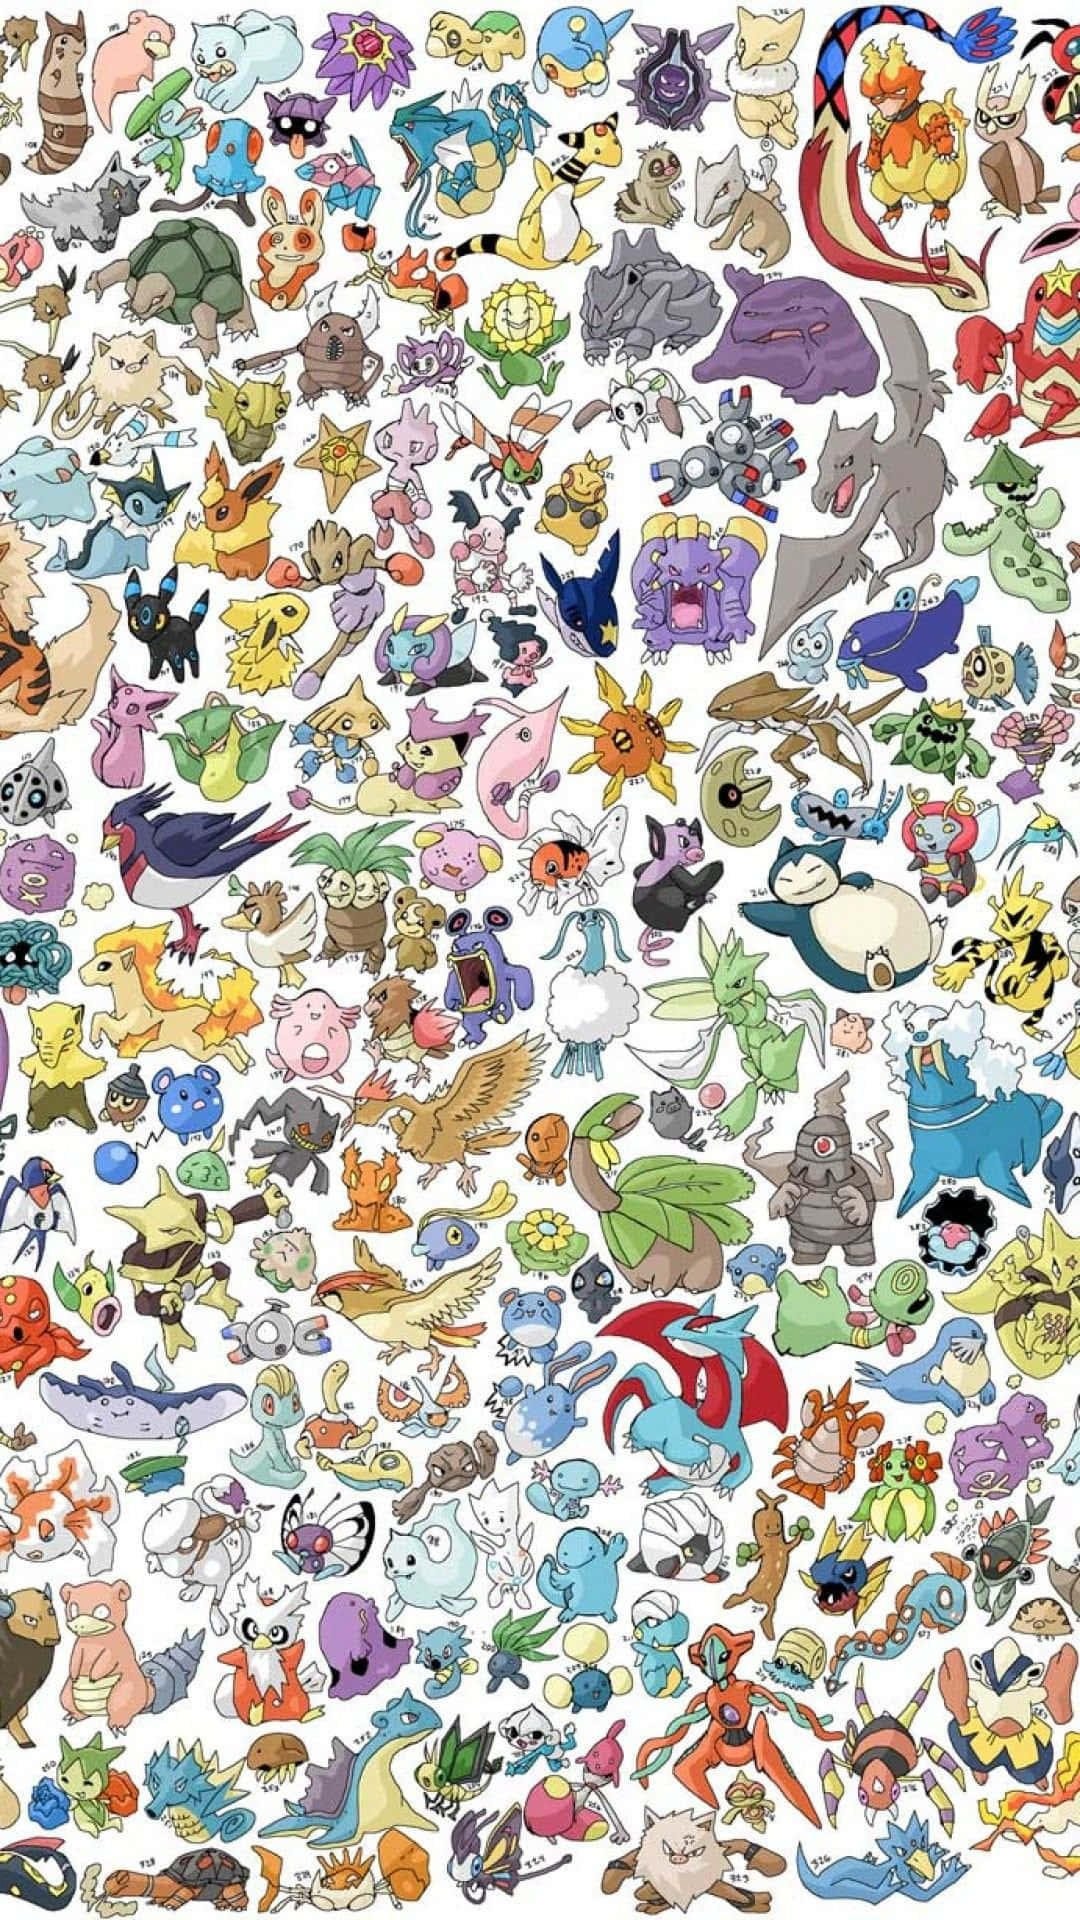 100+] All Pokemon Pictures